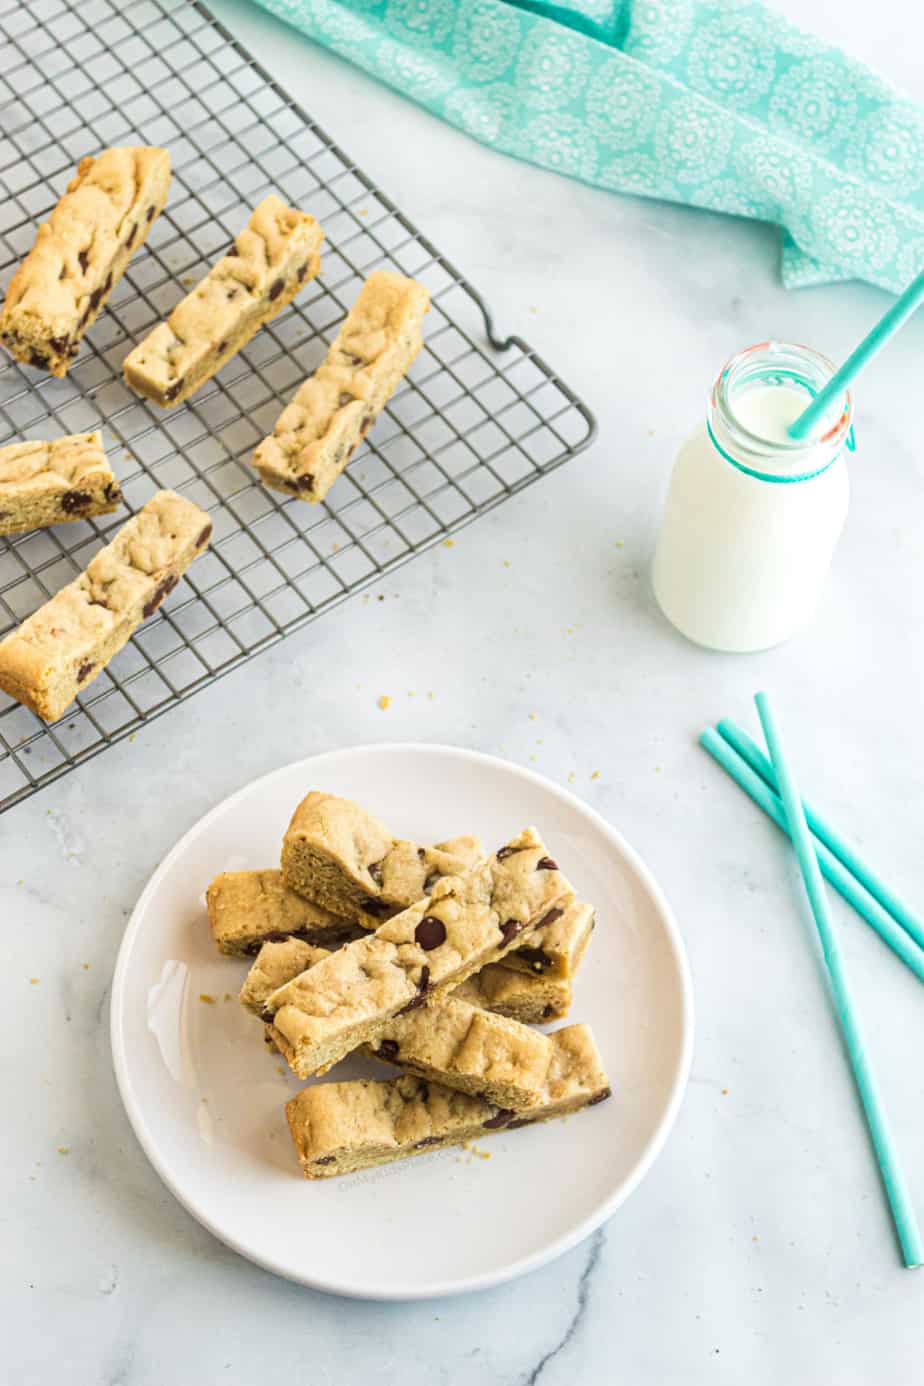 Chocolate chip cookie sticks on a serving plate next to a glass of milk, with a few cookies in the background on a cooling rack.